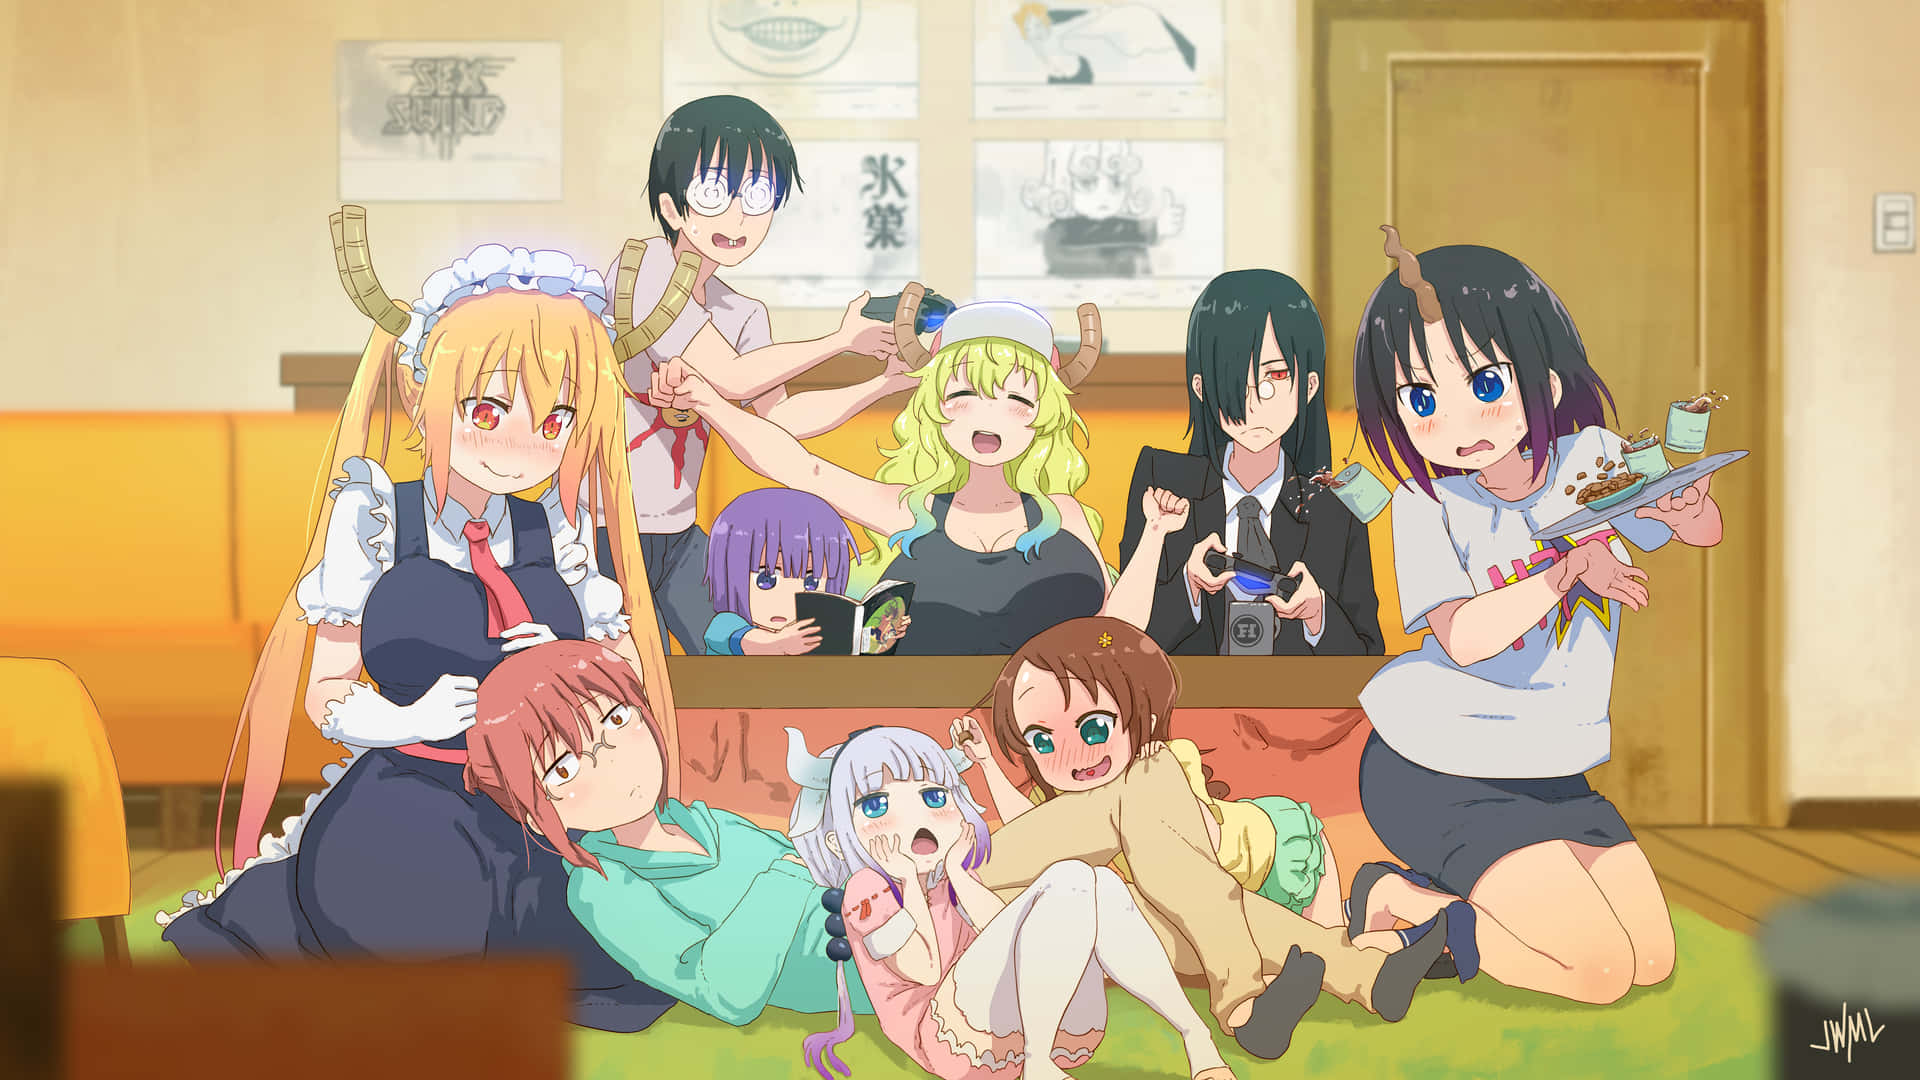 A Group Of Anime Girls Sitting On The Floor Wallpaper